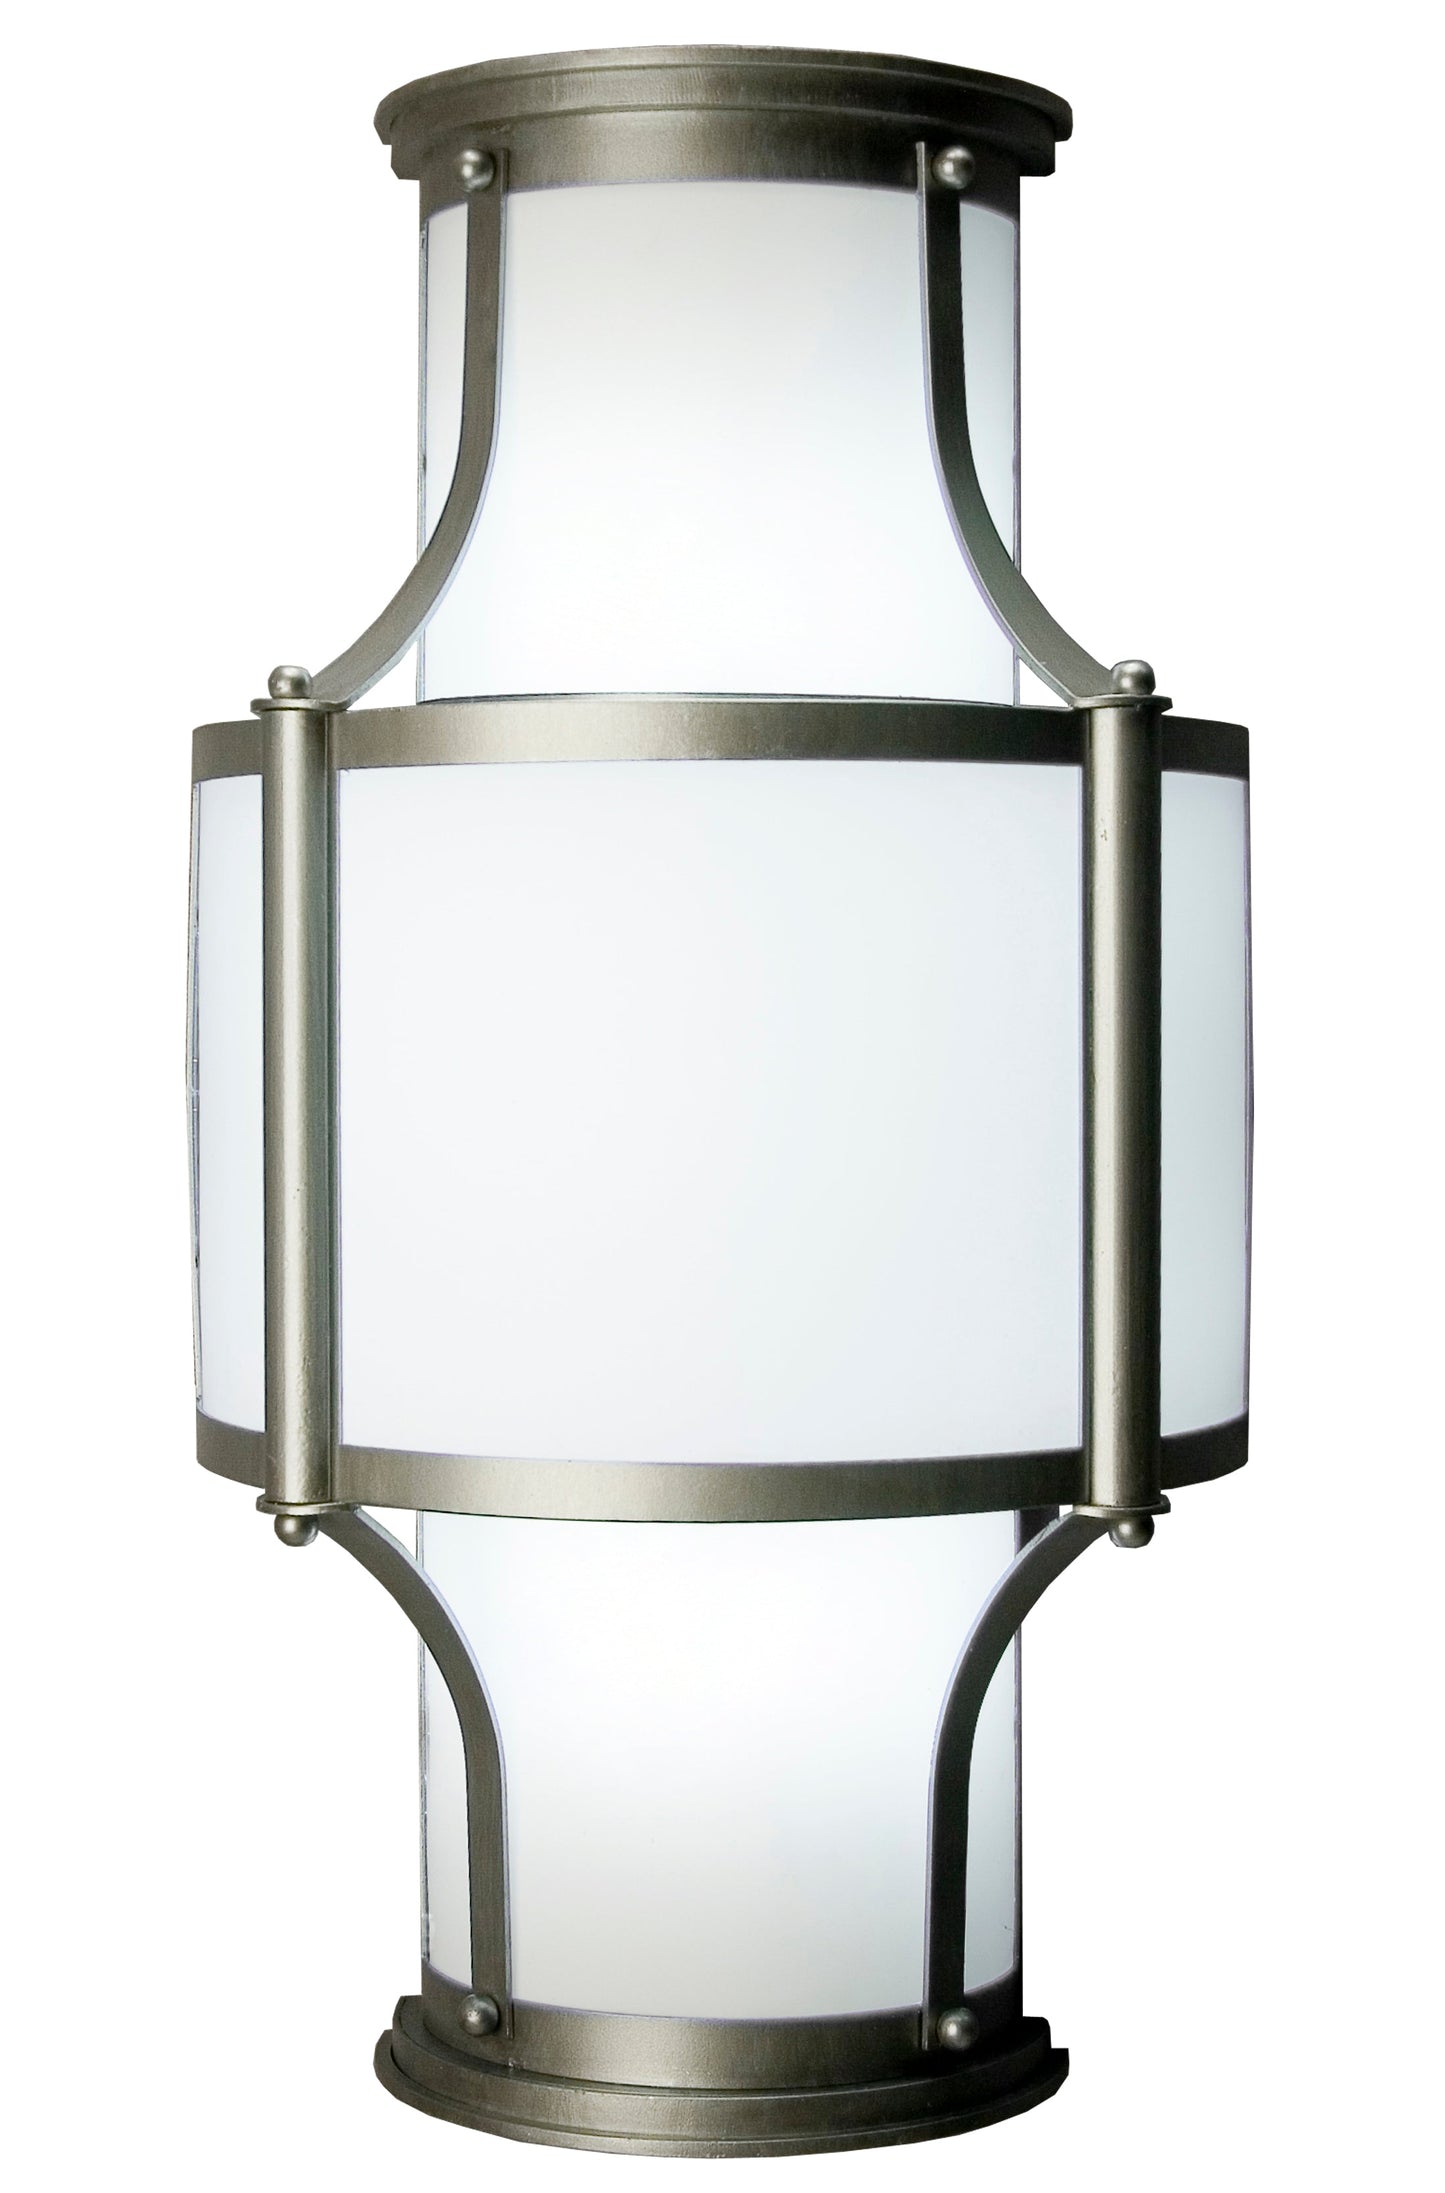 16" Zena Wall Sconce by 2nd Ave Lighting